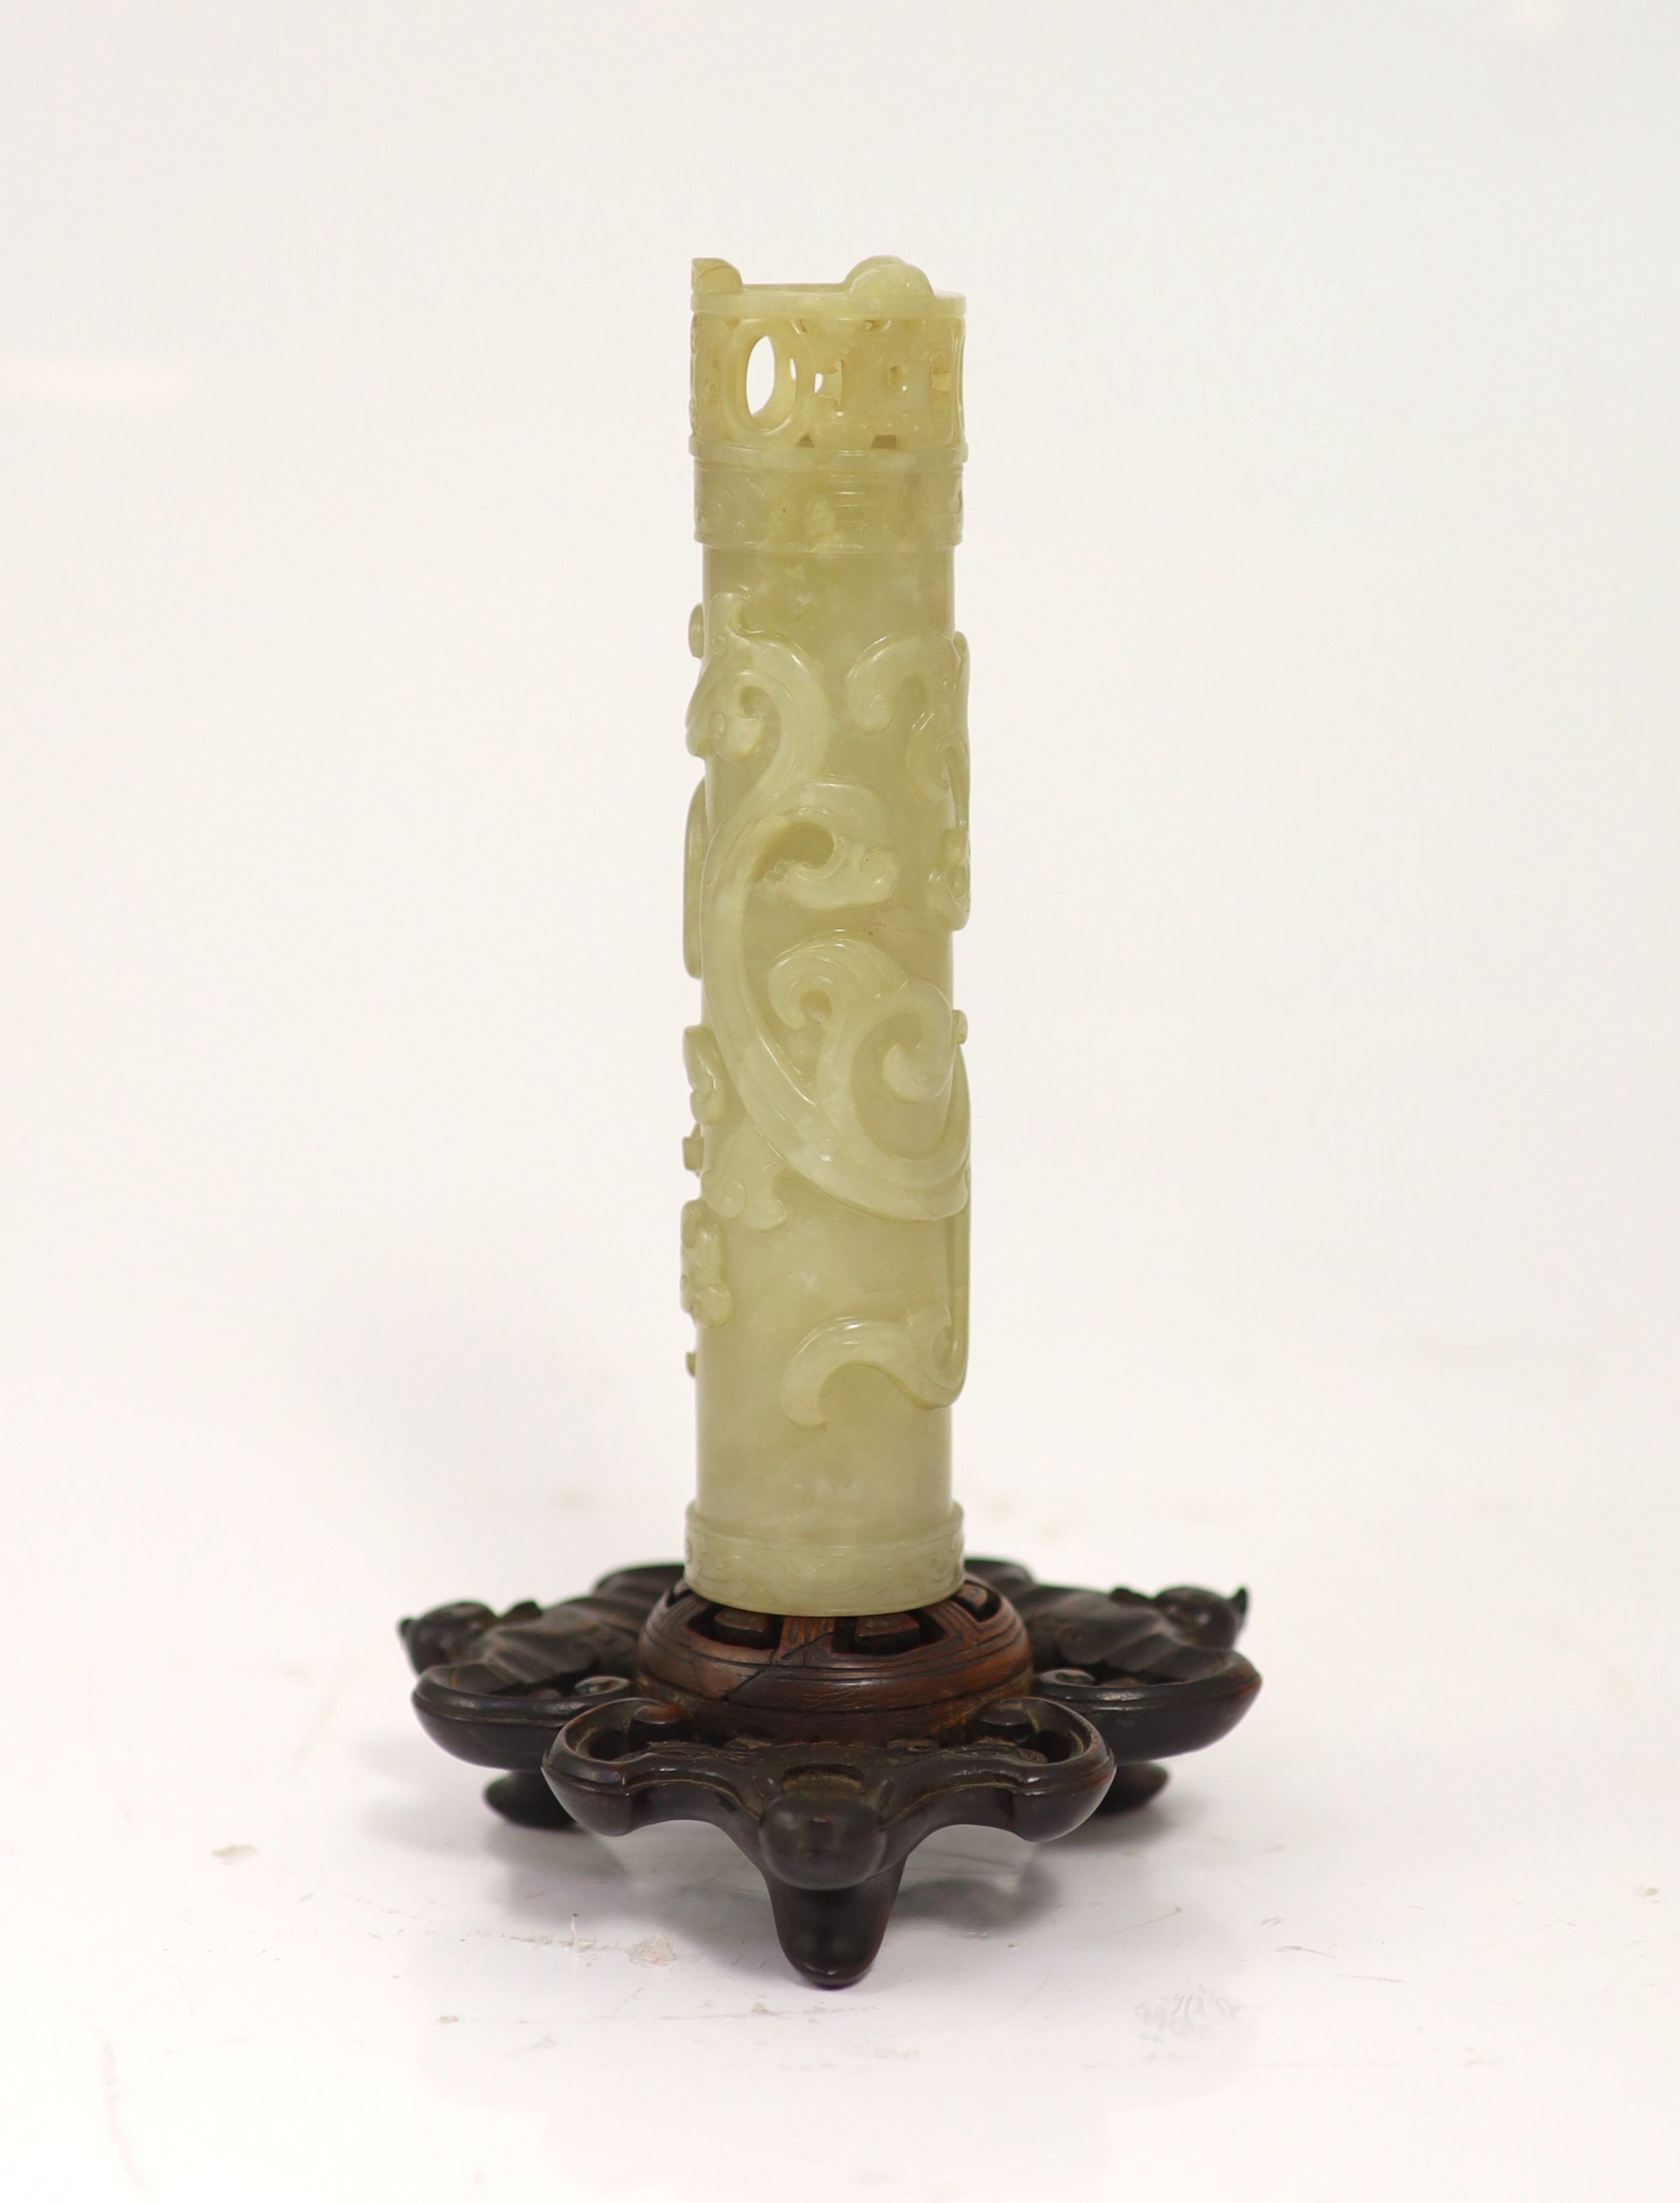 A Chinese celadon jade 'phoenix' cylindrical incense holder, 18th/19th century, 16.7cm high, adapted wood stand